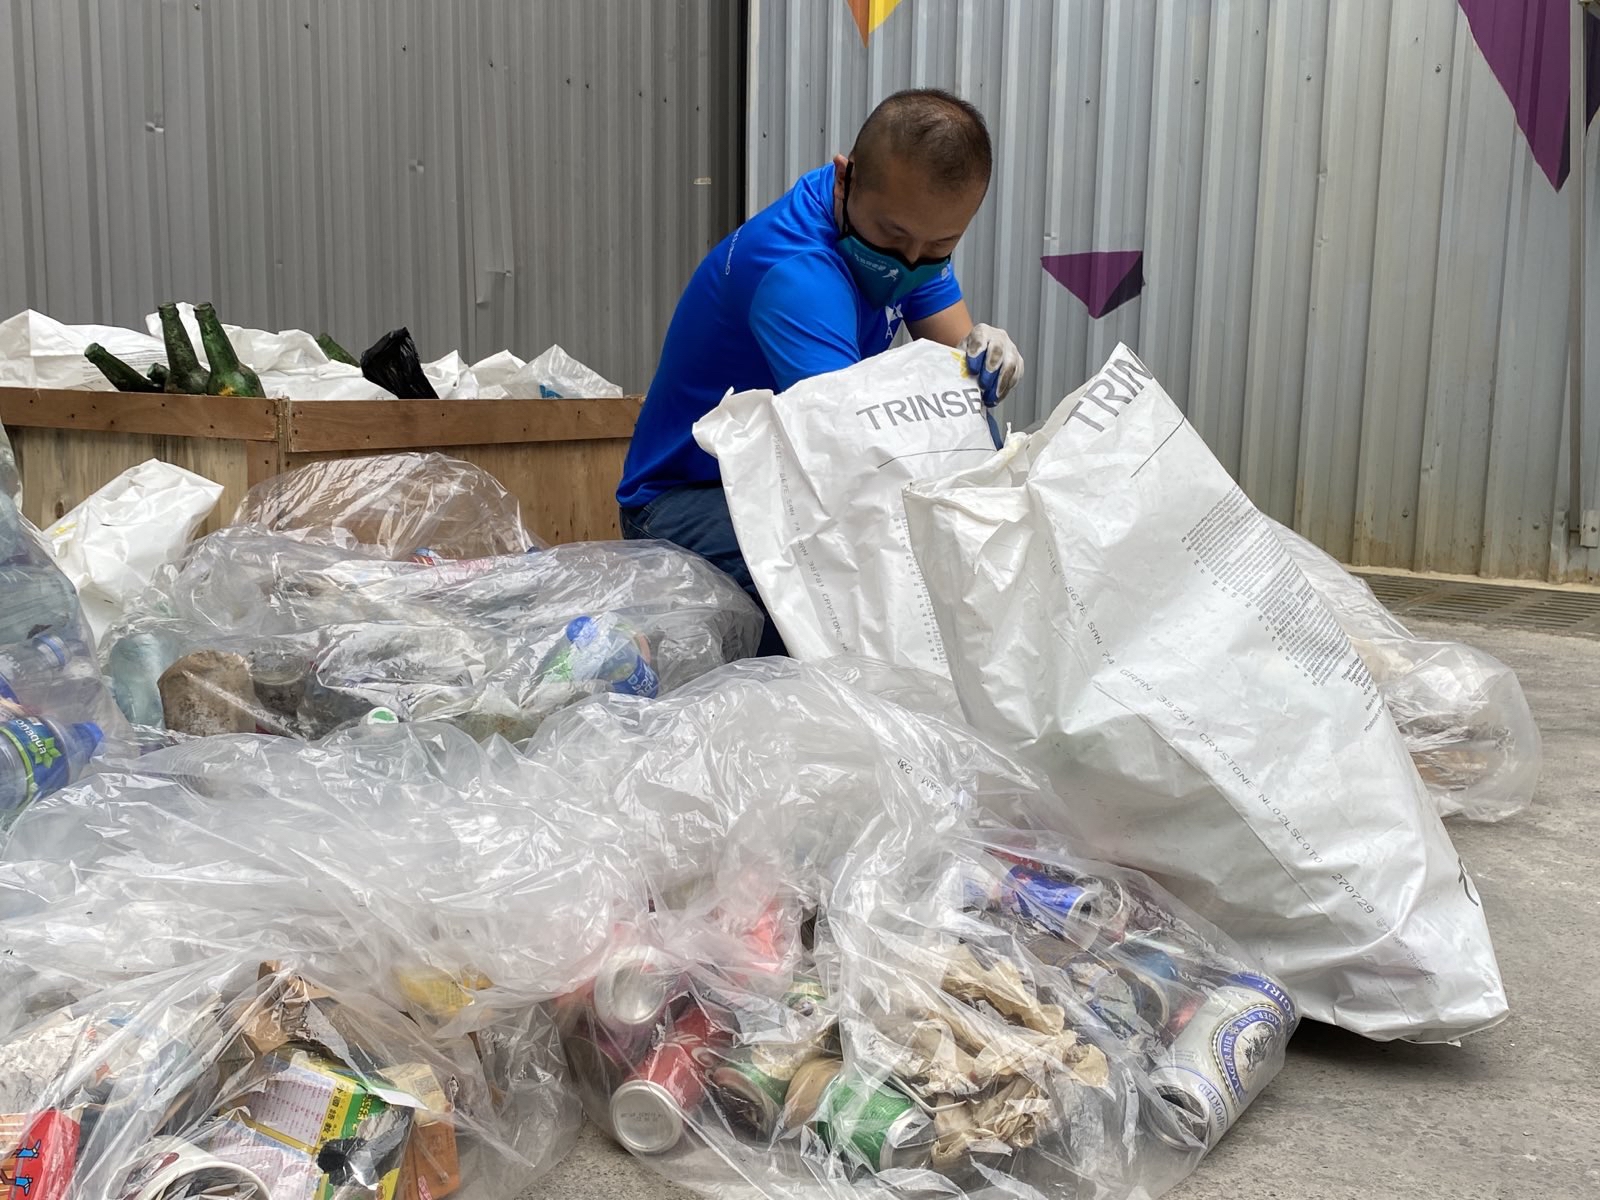 Eco-Rangers collaborated with Seal Eco Advance Limited, a local recycling factory, and its recycling network to collect recyclables and recycle them into useful and sustainable raw materials and products.